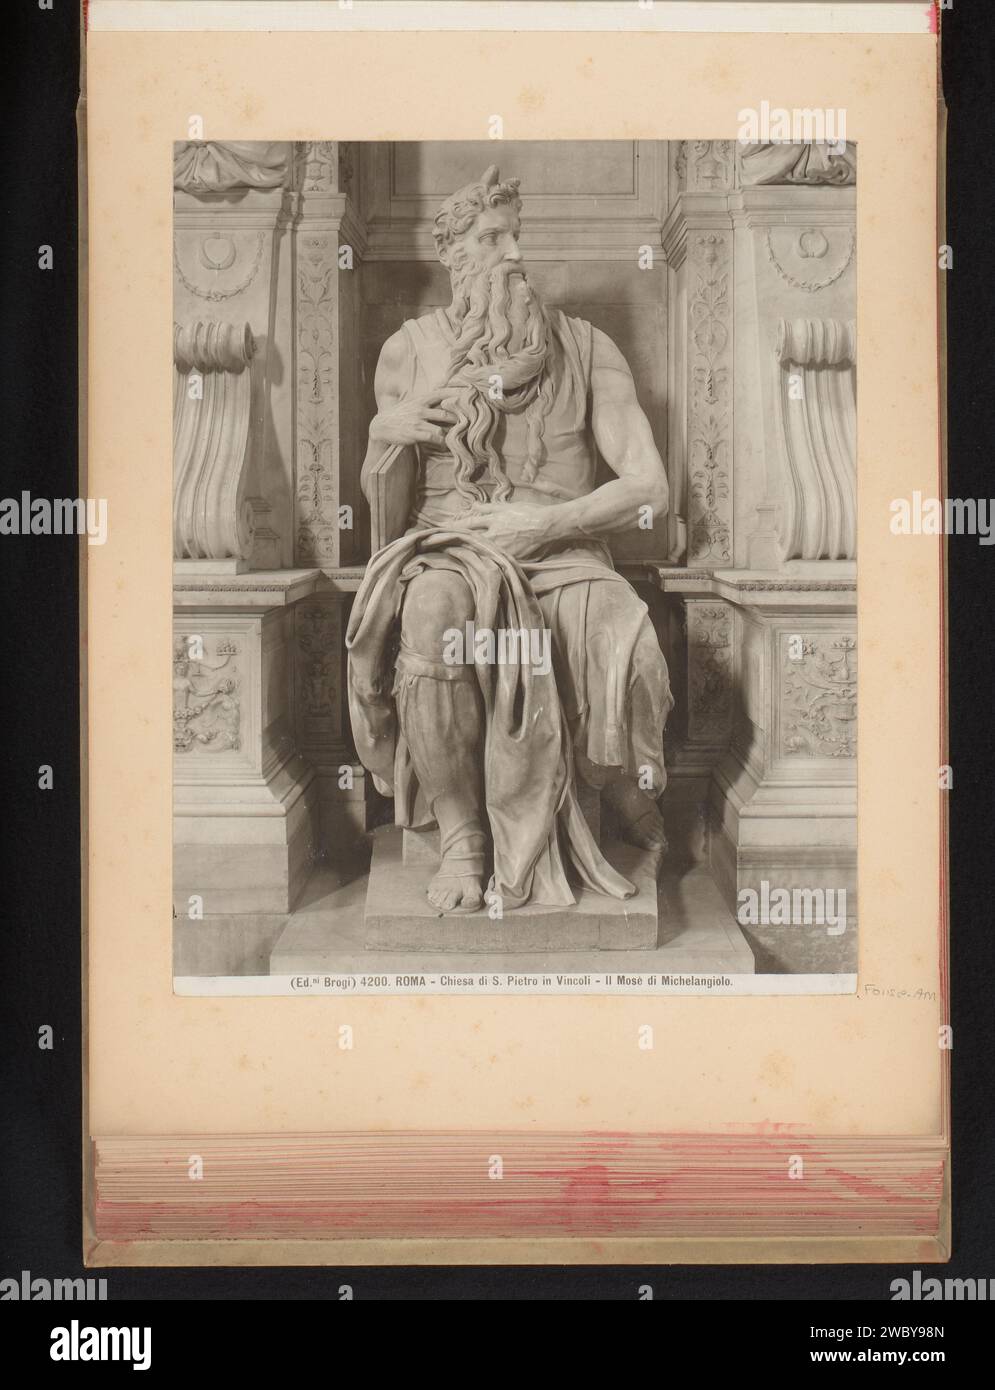 Sculpture in the San Pietro in Vincoli, representing Mozes, Edizione Brogi, c. 1875 - In or Before 1907 photograph Part of photo album with recordings of sights and artworks in Italy. San Pietro in Vincoli photographic support gelatin silver print sculpture. Moses (not in biblical context); possible attributes: rays of light or horns on his head, rod, Tables of the Law Stock Photo